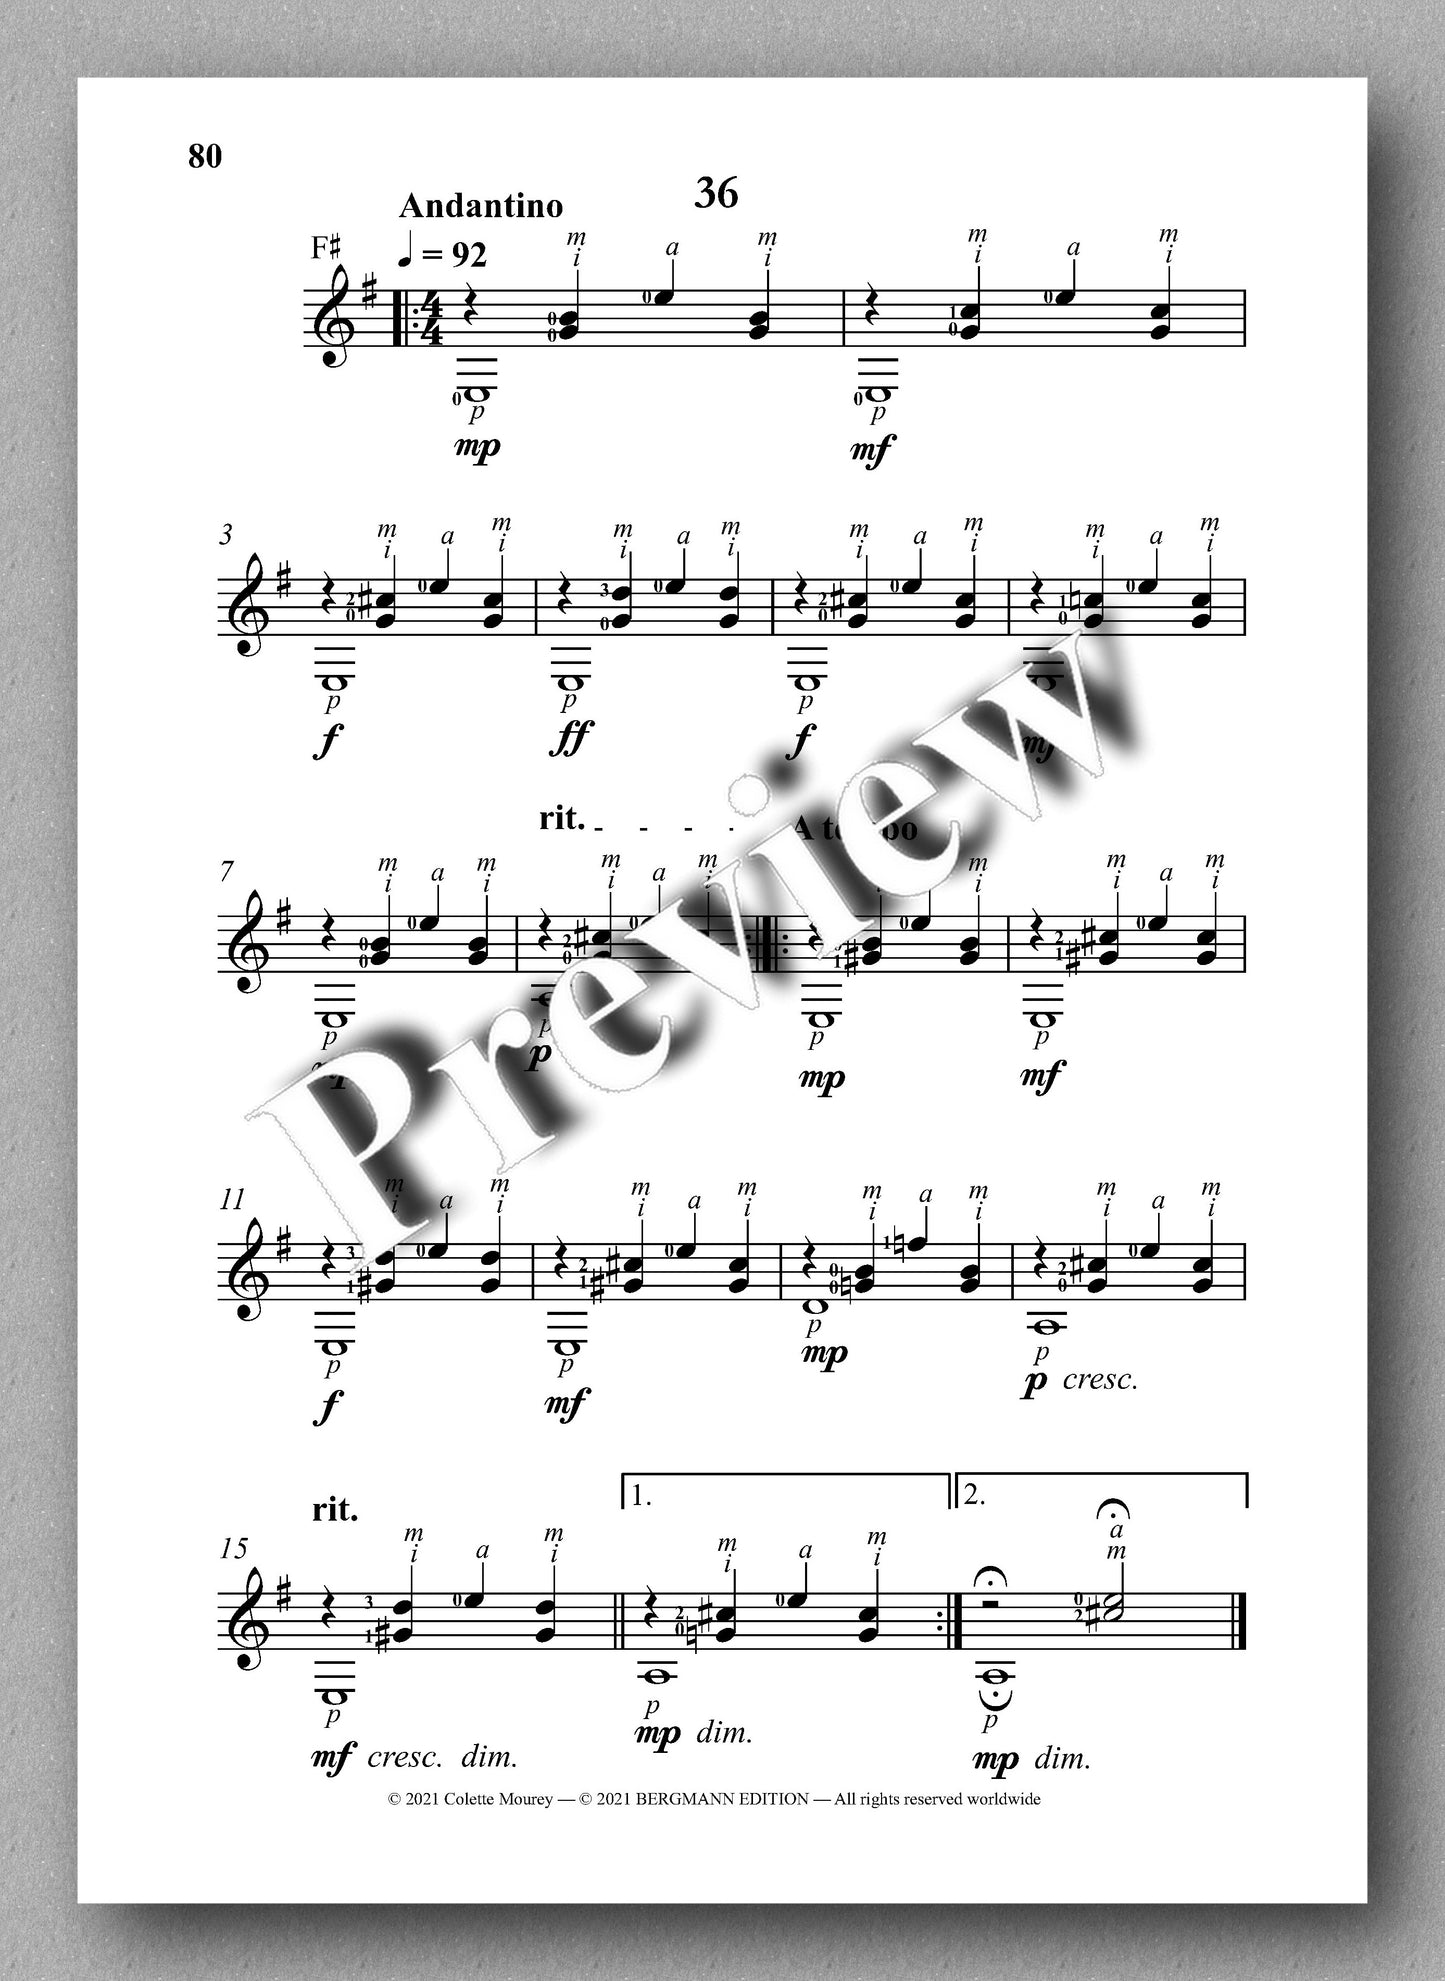 Mourey, Step by Step - music score 4